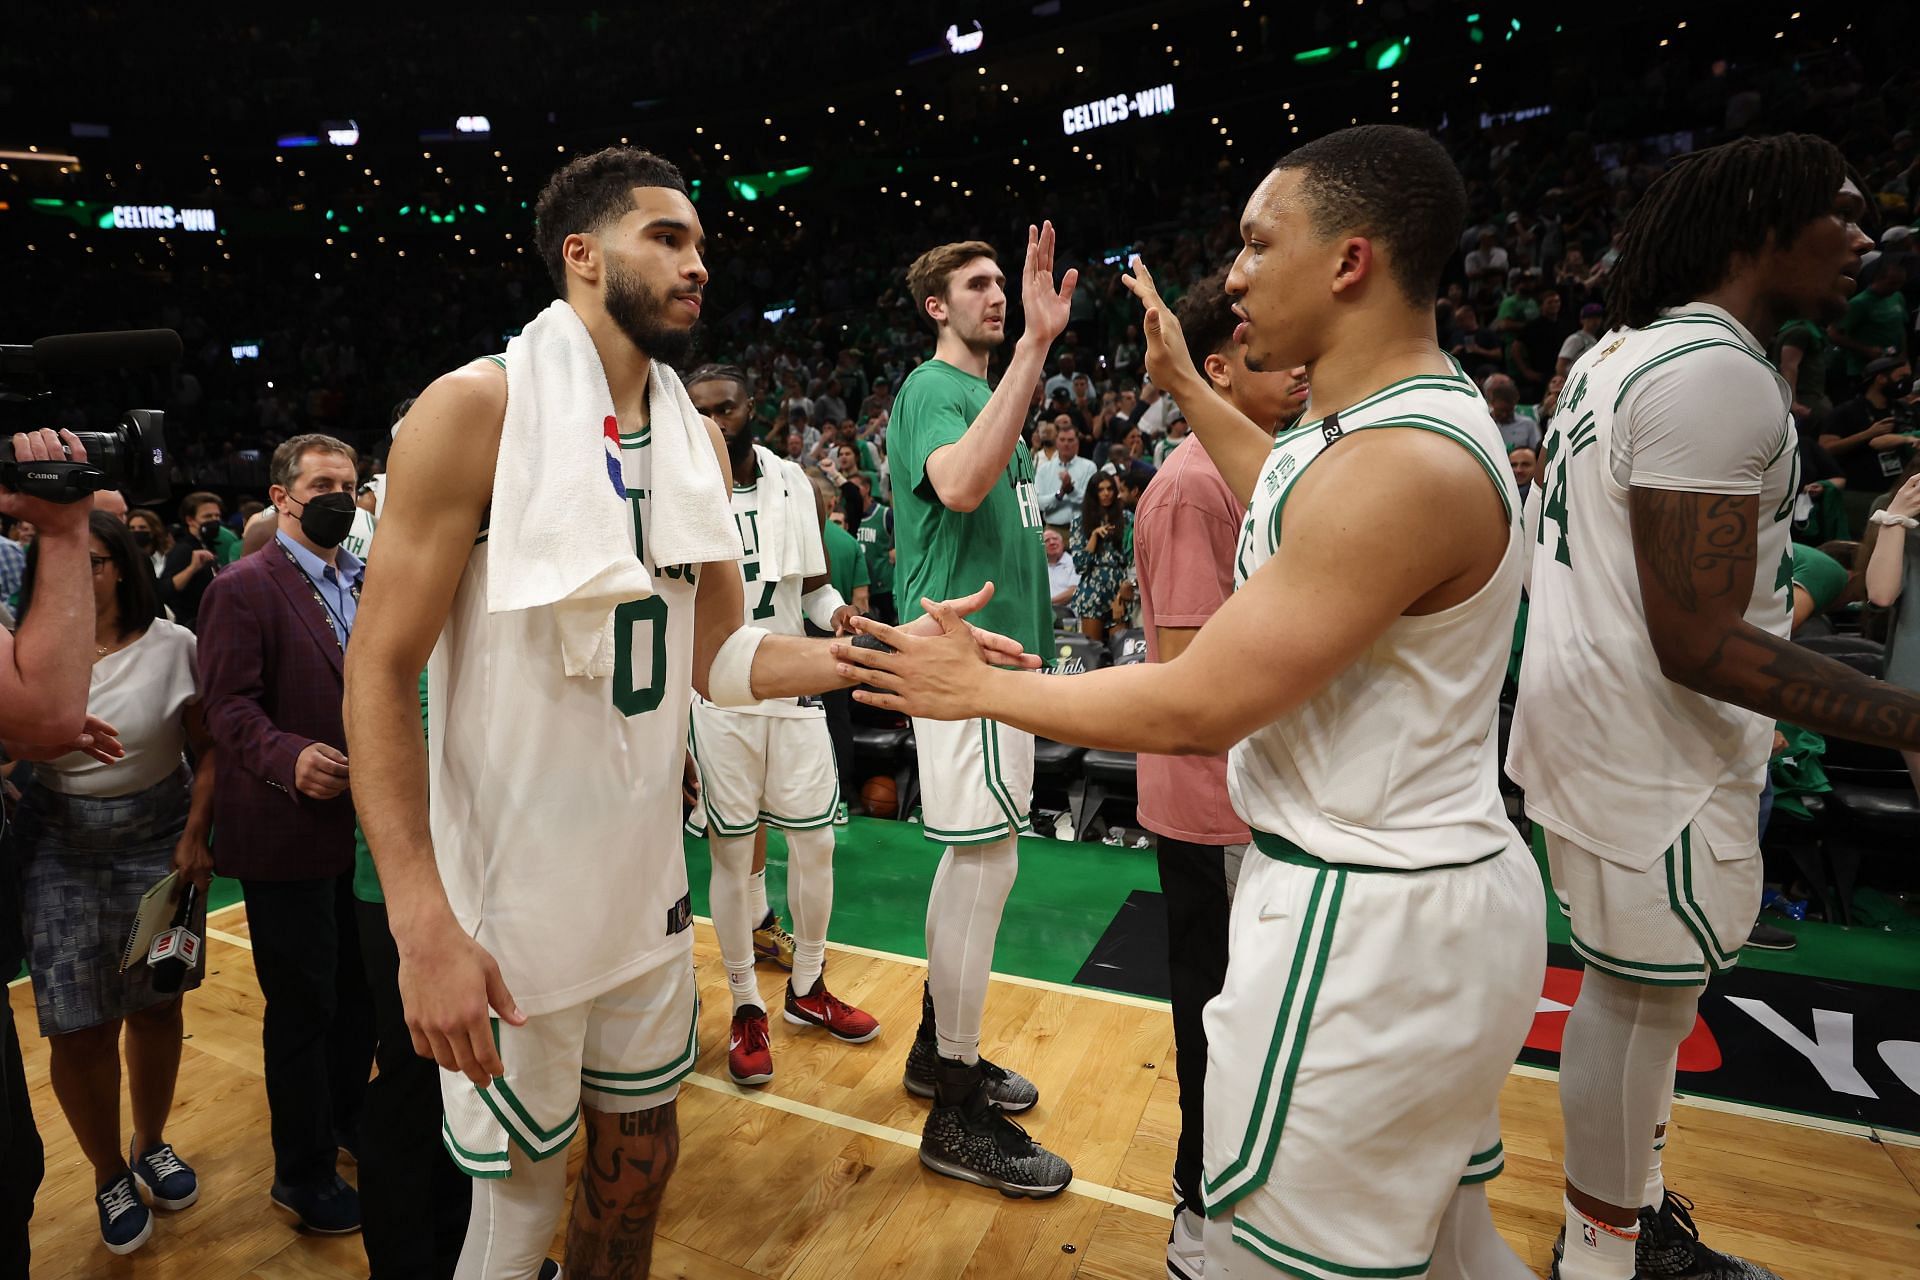 Jayson Tatum (0) and Grant Williams of the Boston Celtics celebrate their 116-100 win against the Golden State Warriors after Game 3 on Wednesday in Boston, Massachusetts.